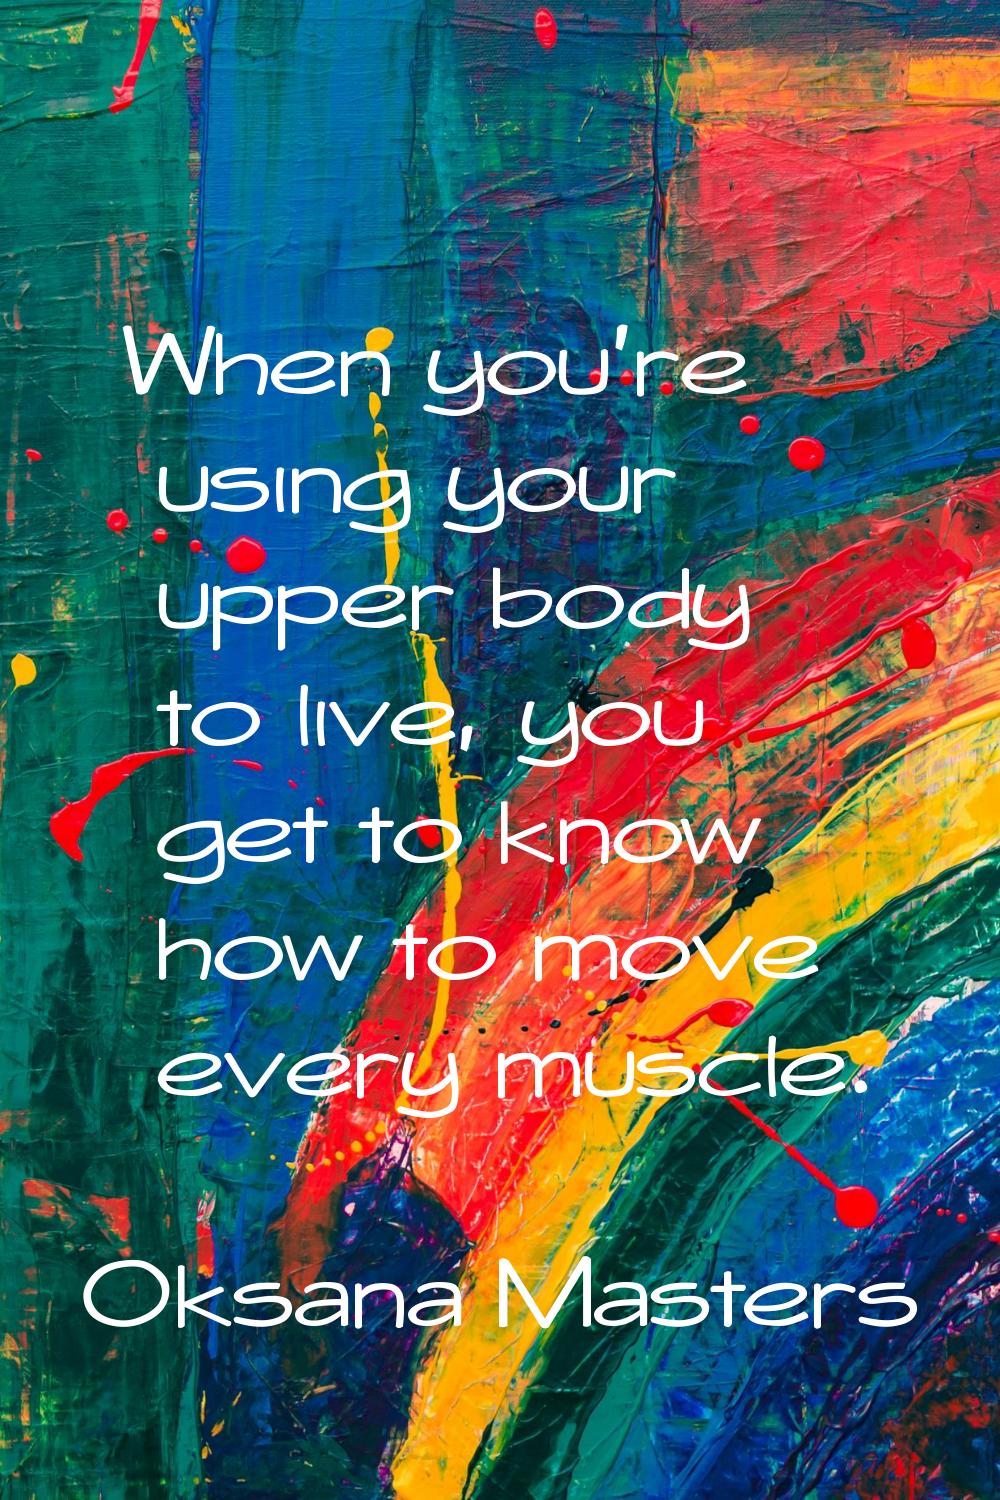 When you're using your upper body to live, you get to know how to move every muscle.